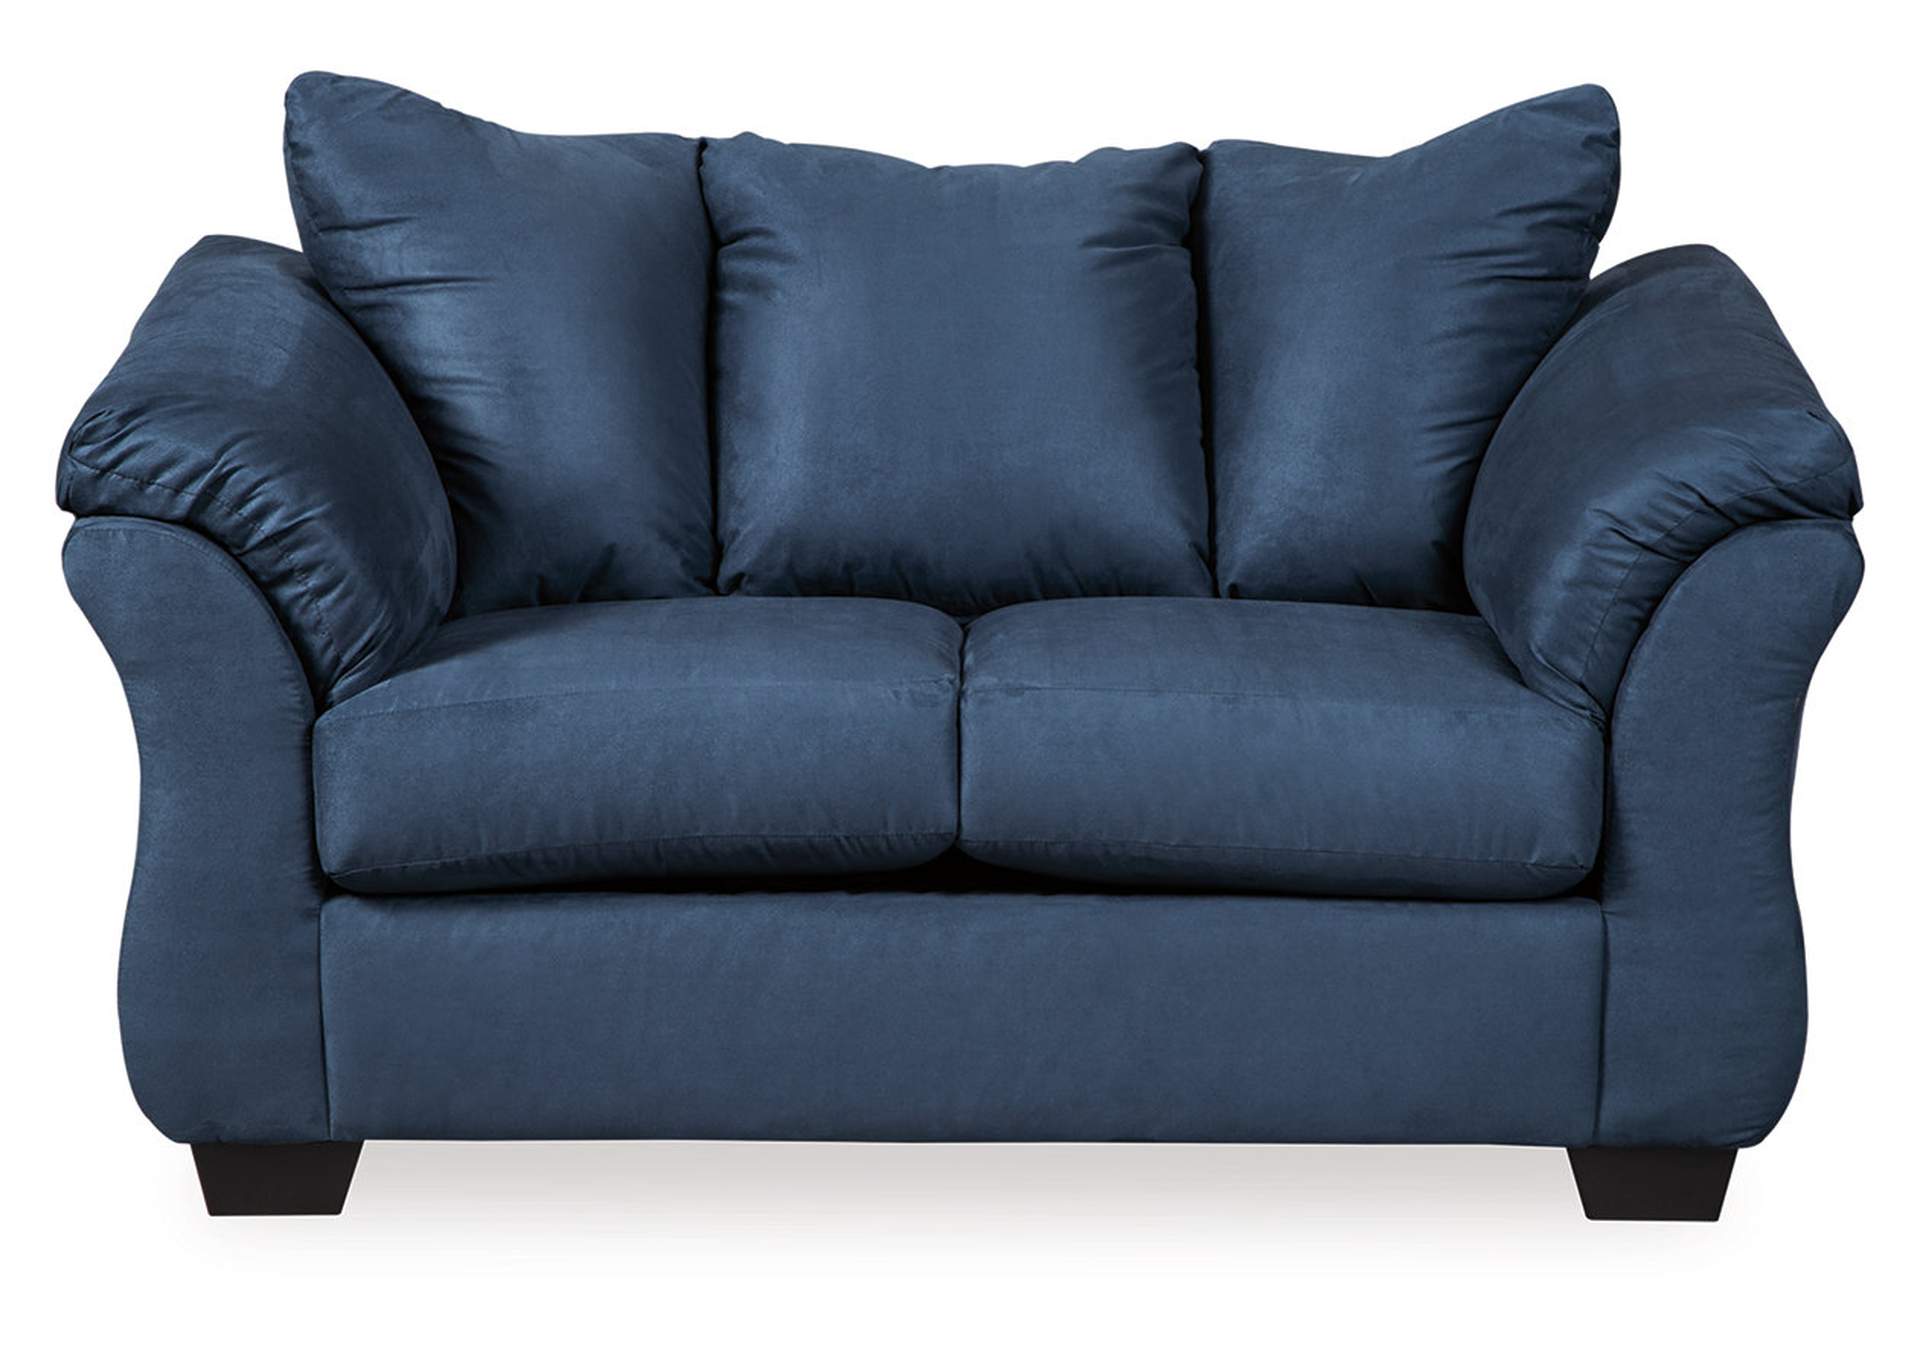 Darcy Sofa, Loveseat, and Chair,Signature Design By Ashley